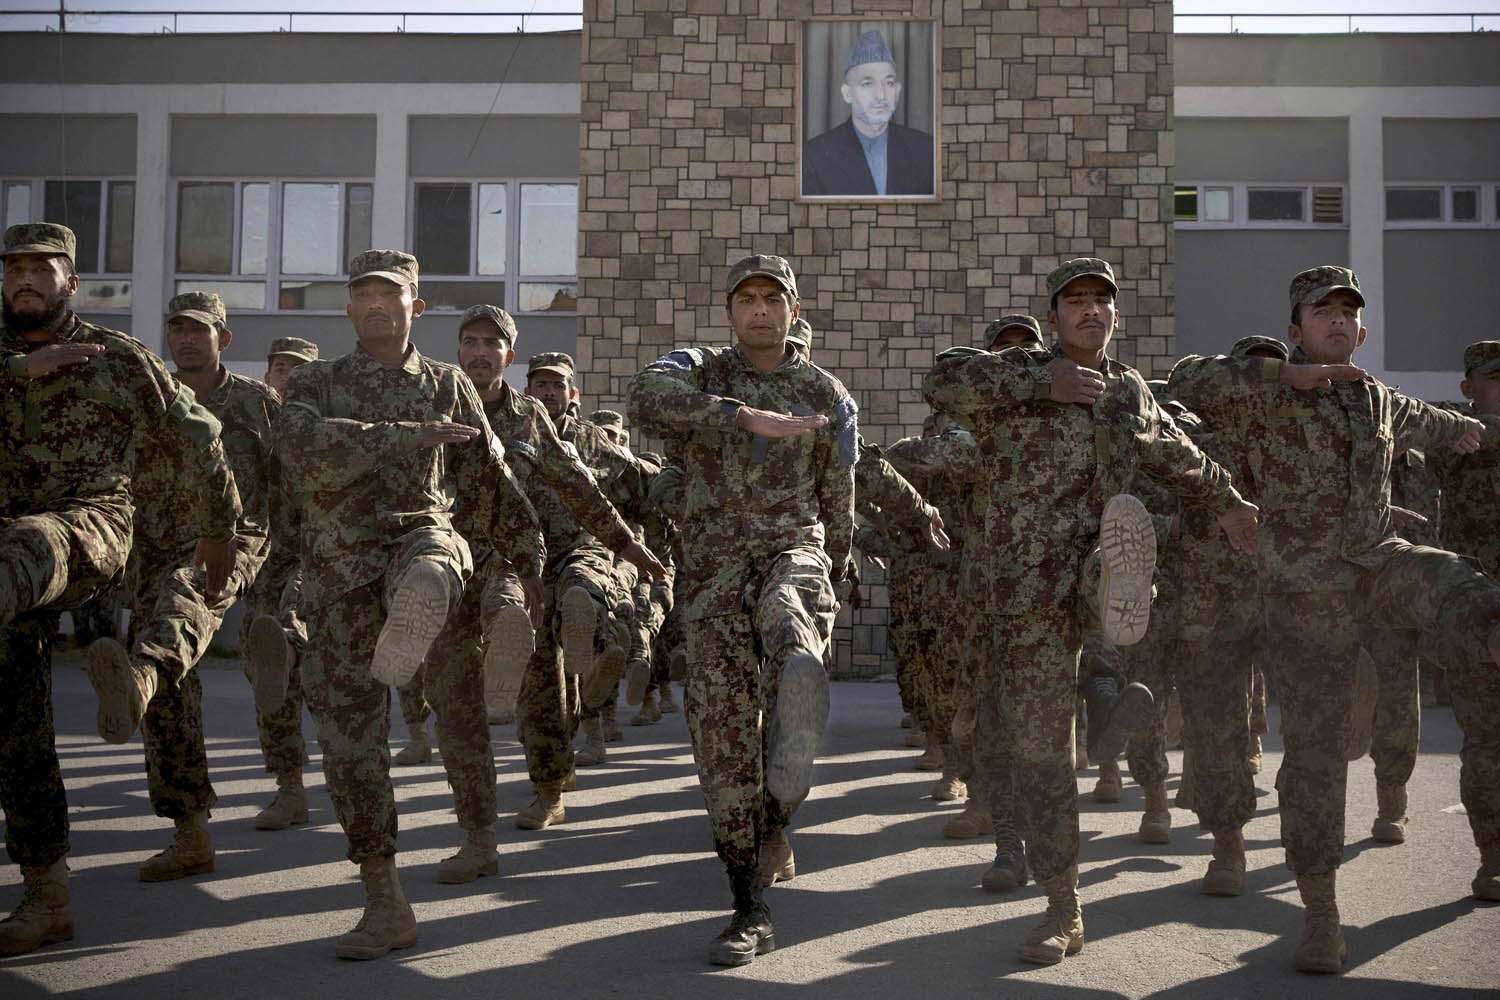 Nov. 26, 2013. Afghan Army soldiers exercise under a picture of Afghanistan's President Hamid Karzai at a training facility in the outskirts of Kabul.